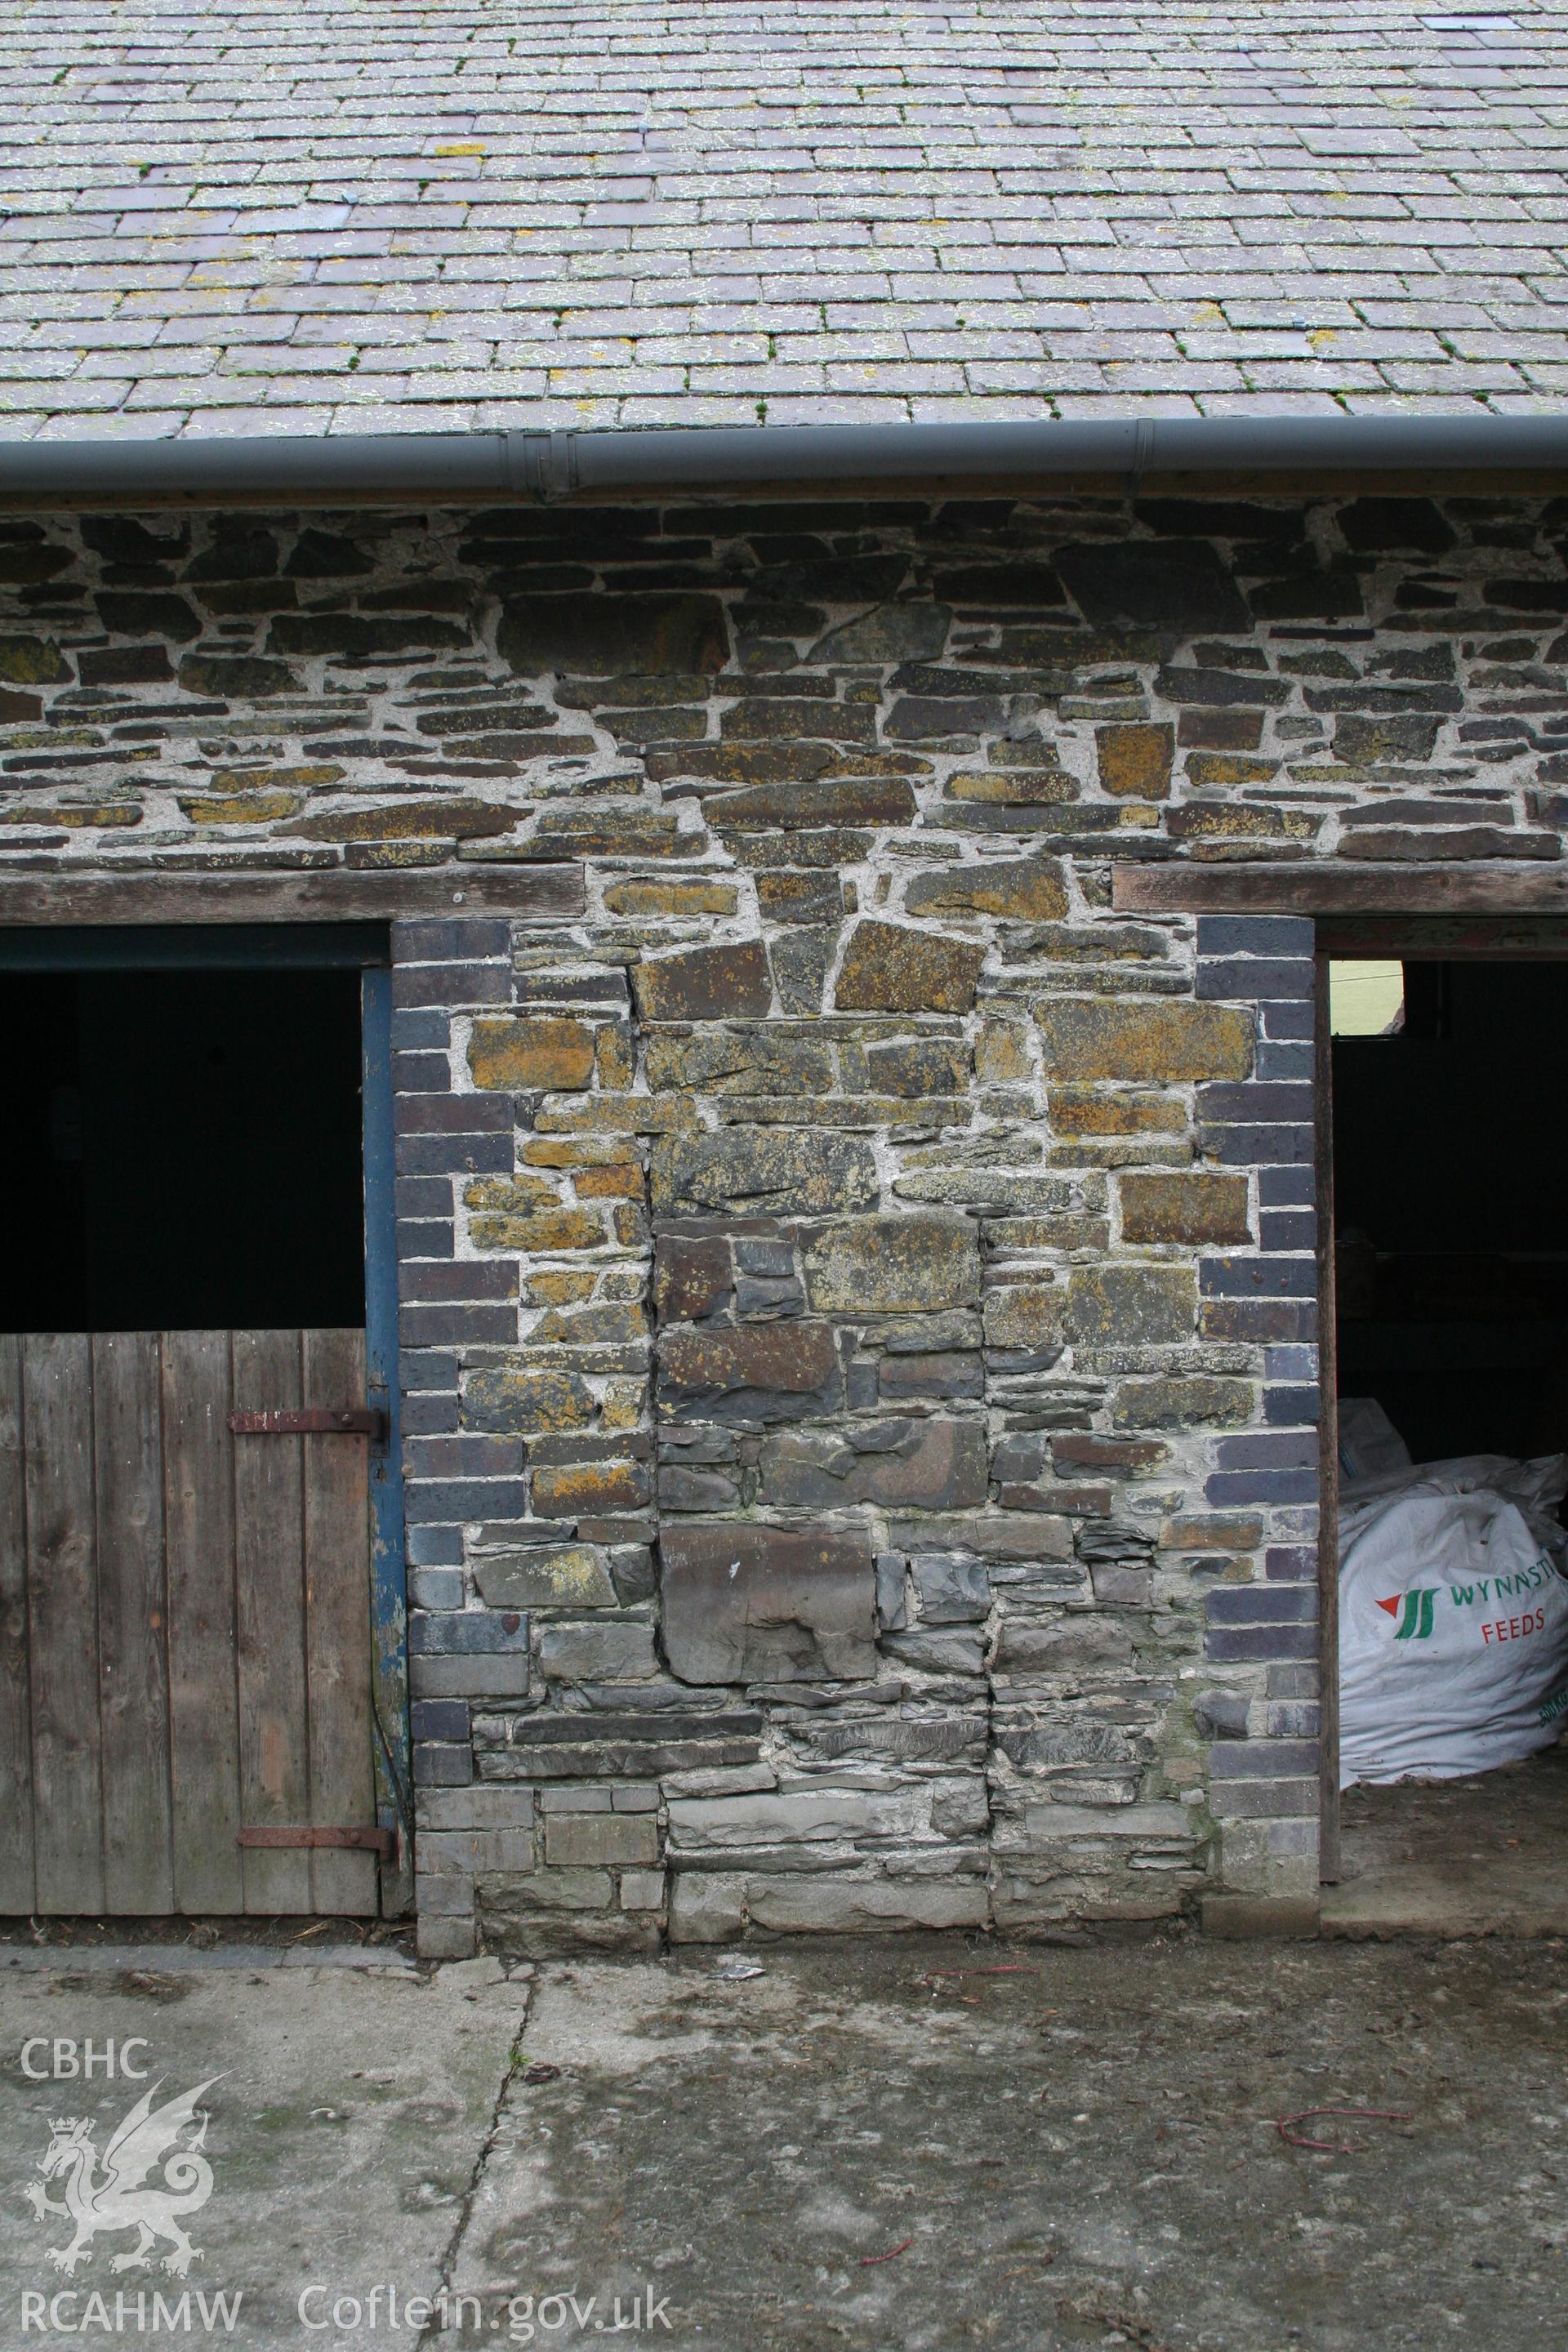 Exterior view of stable-esque door and engineering brick and stone doorway. Photographic survey of the southern range of cowhouses at Tan-y-Graig Farm, Llanfarian. Conducted by Geoff Ward and John Wiles, 11th December 2006.